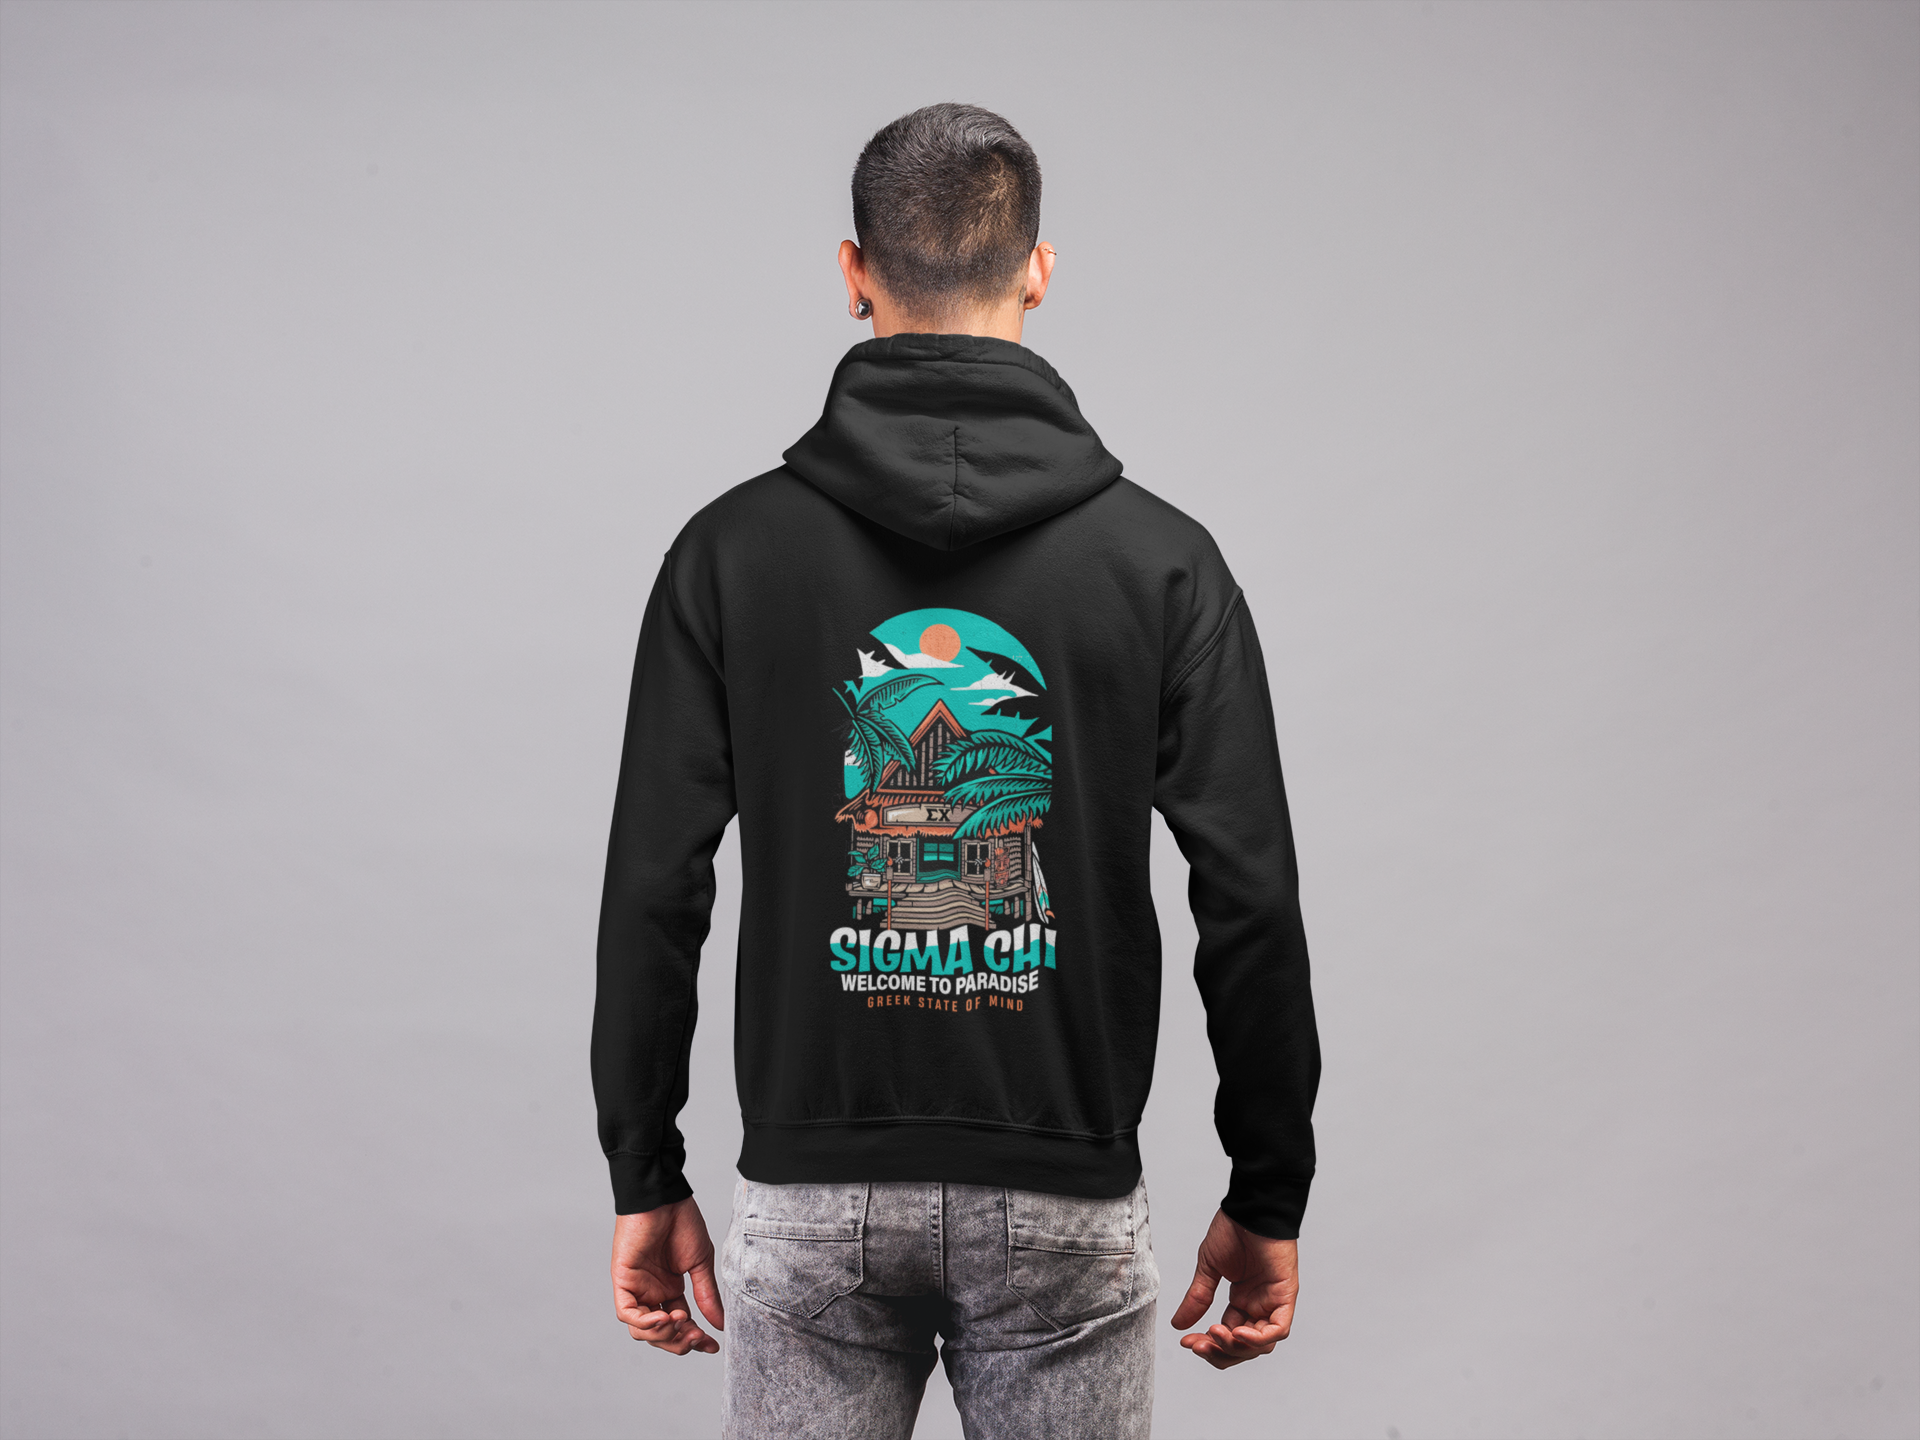 Sigma Chi Graphic Hoodie | Welcome to Paradise | Sigma Chi Fraternity Merch House model 